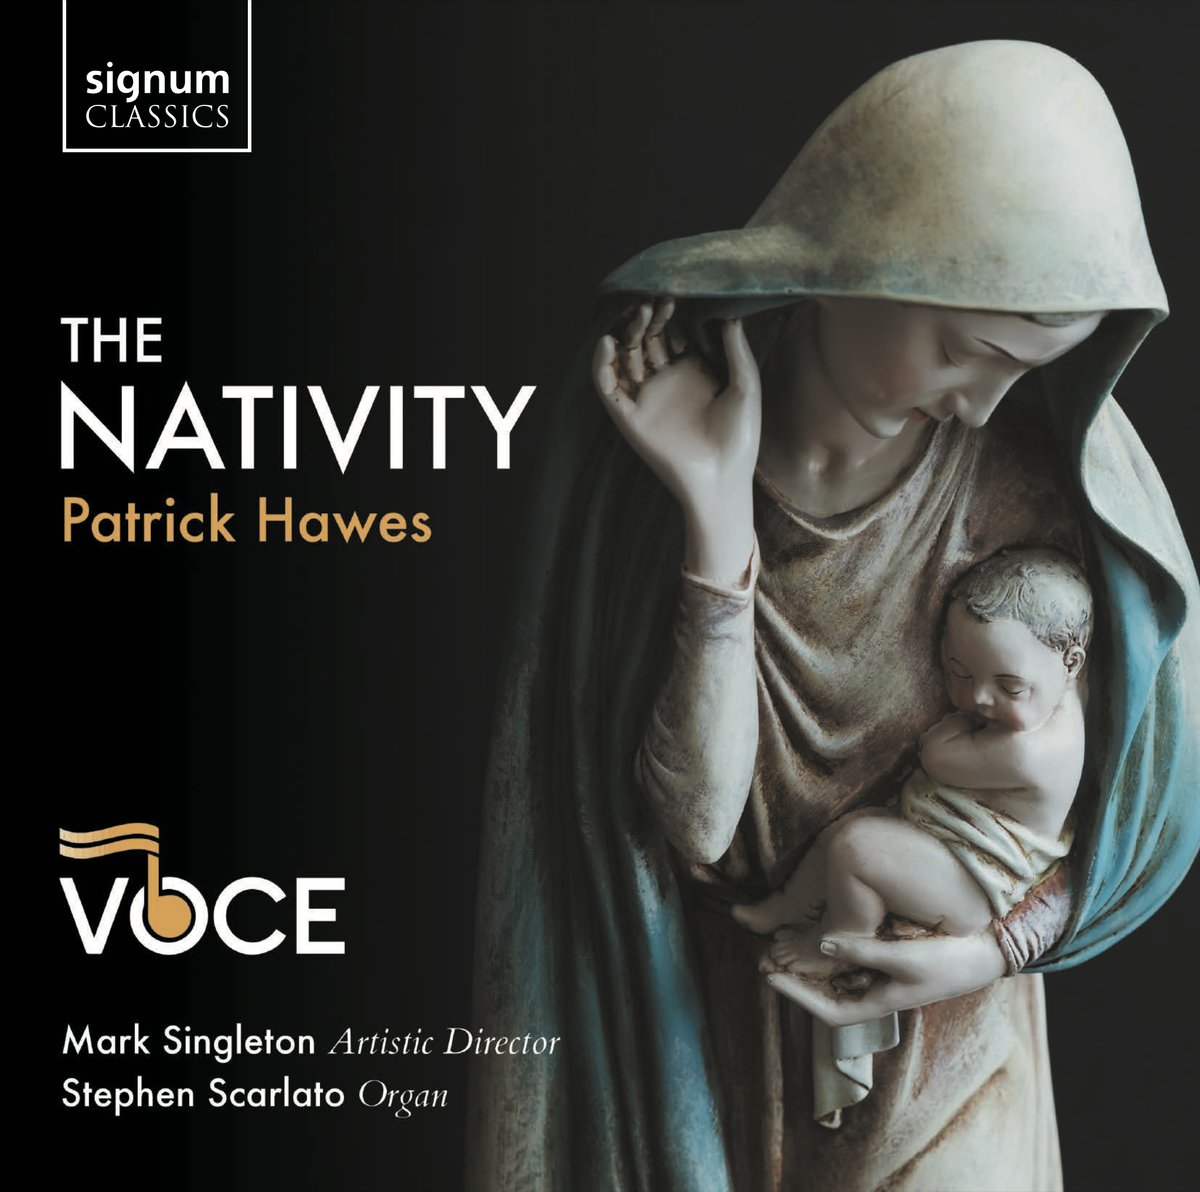 New album out this Friday and here's a taster of the first track! #WhatChildIsThis #TheNativity music.apple.com/gb/album/what-… @voceinc @SignumRecords